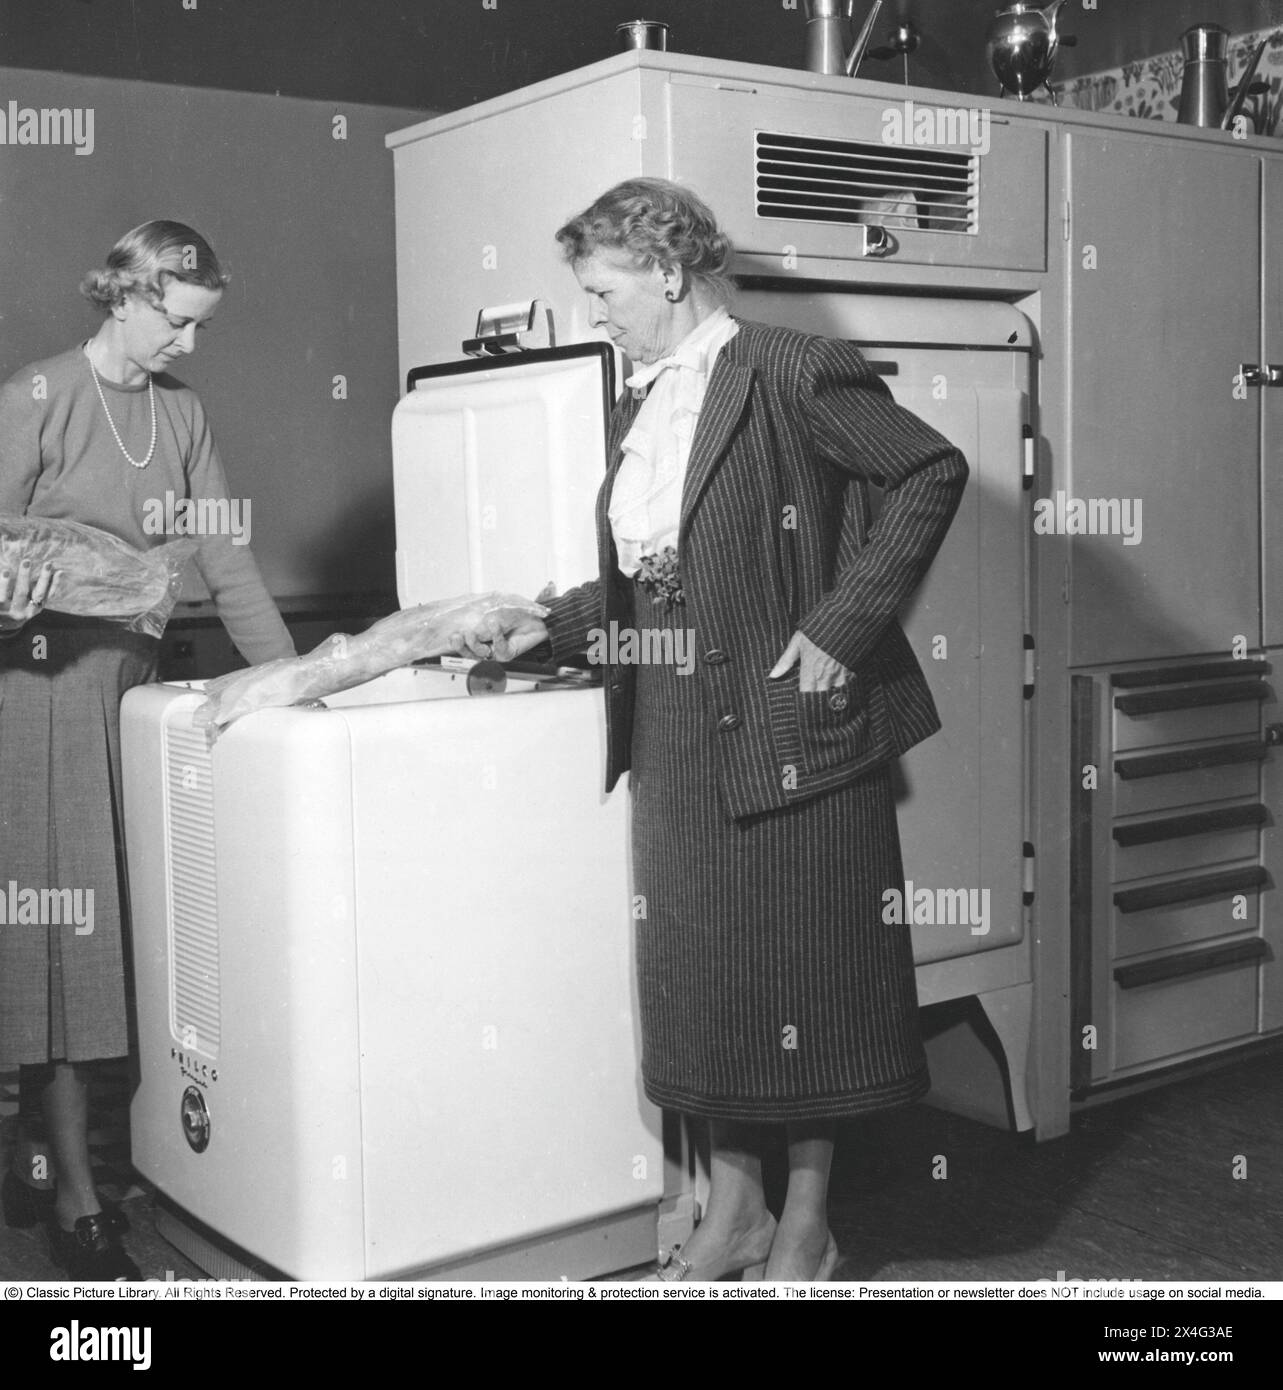 Freezer box in the 1950s. Baroness Märtha Roshall with Baroness Madeleine Leijonhufvud at a freezer from the American manufacturer Philco, where they keep deep-frozen food. Deep-frozen food would be the start of a revolution in household habits and food storage. Many were sceptical, and especially canned food manufacturers considered frozen food to be a passing trend. 1950 Stock Photo